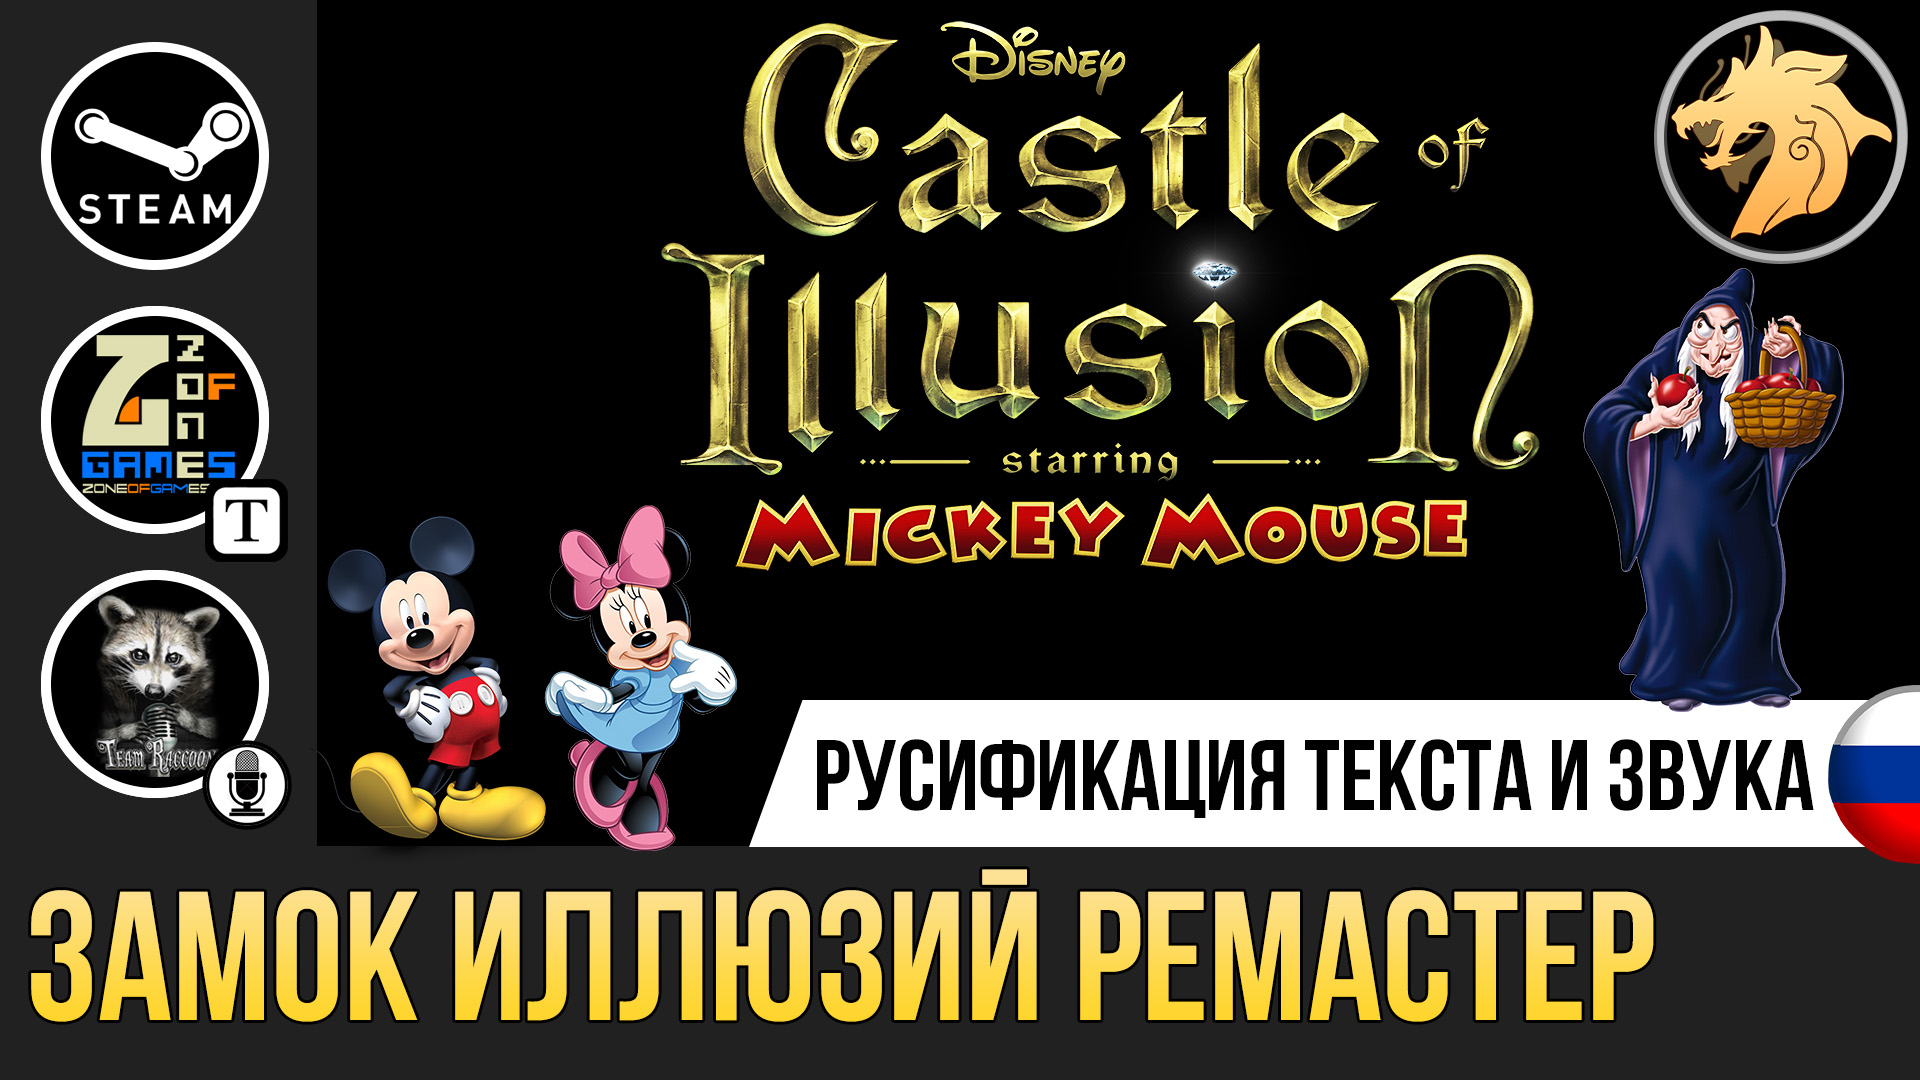 стим castle of illusion starring mickey mouse фото 70